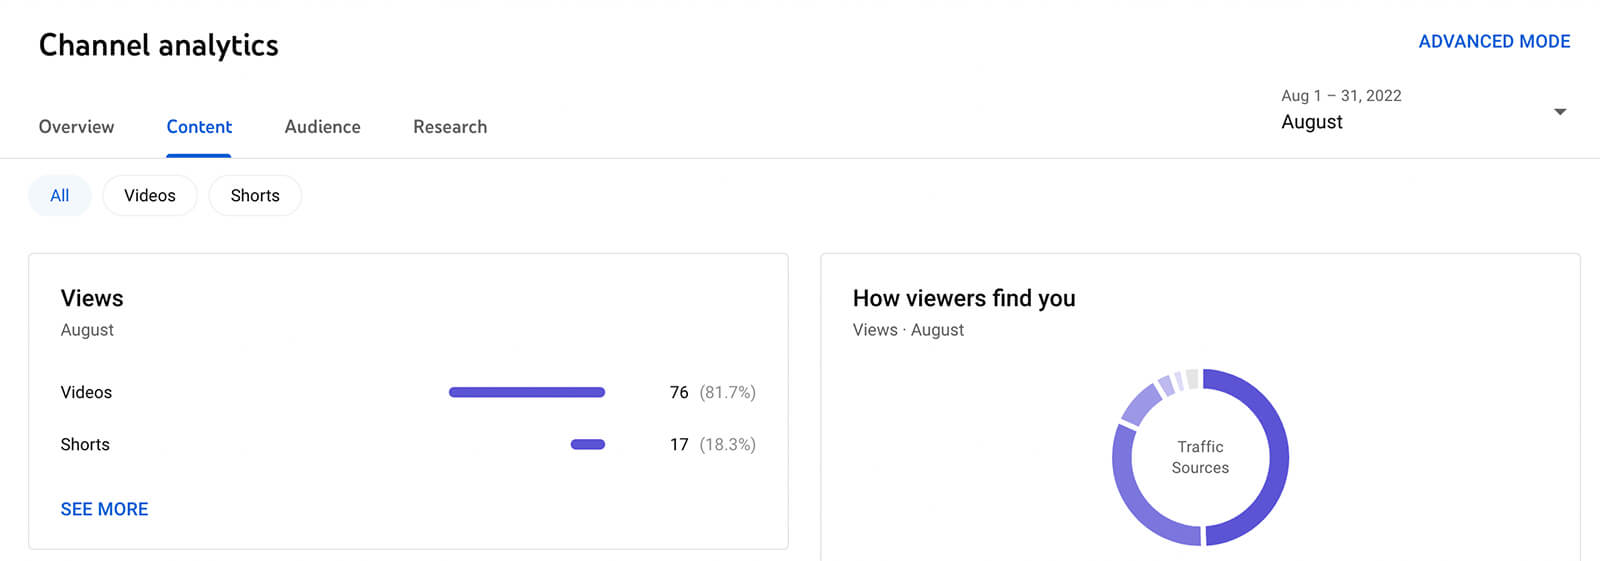 how-to-use-youtube-studio-channel-level-content-analytics-all-content-metrics-how-viewers-find-you-example-1